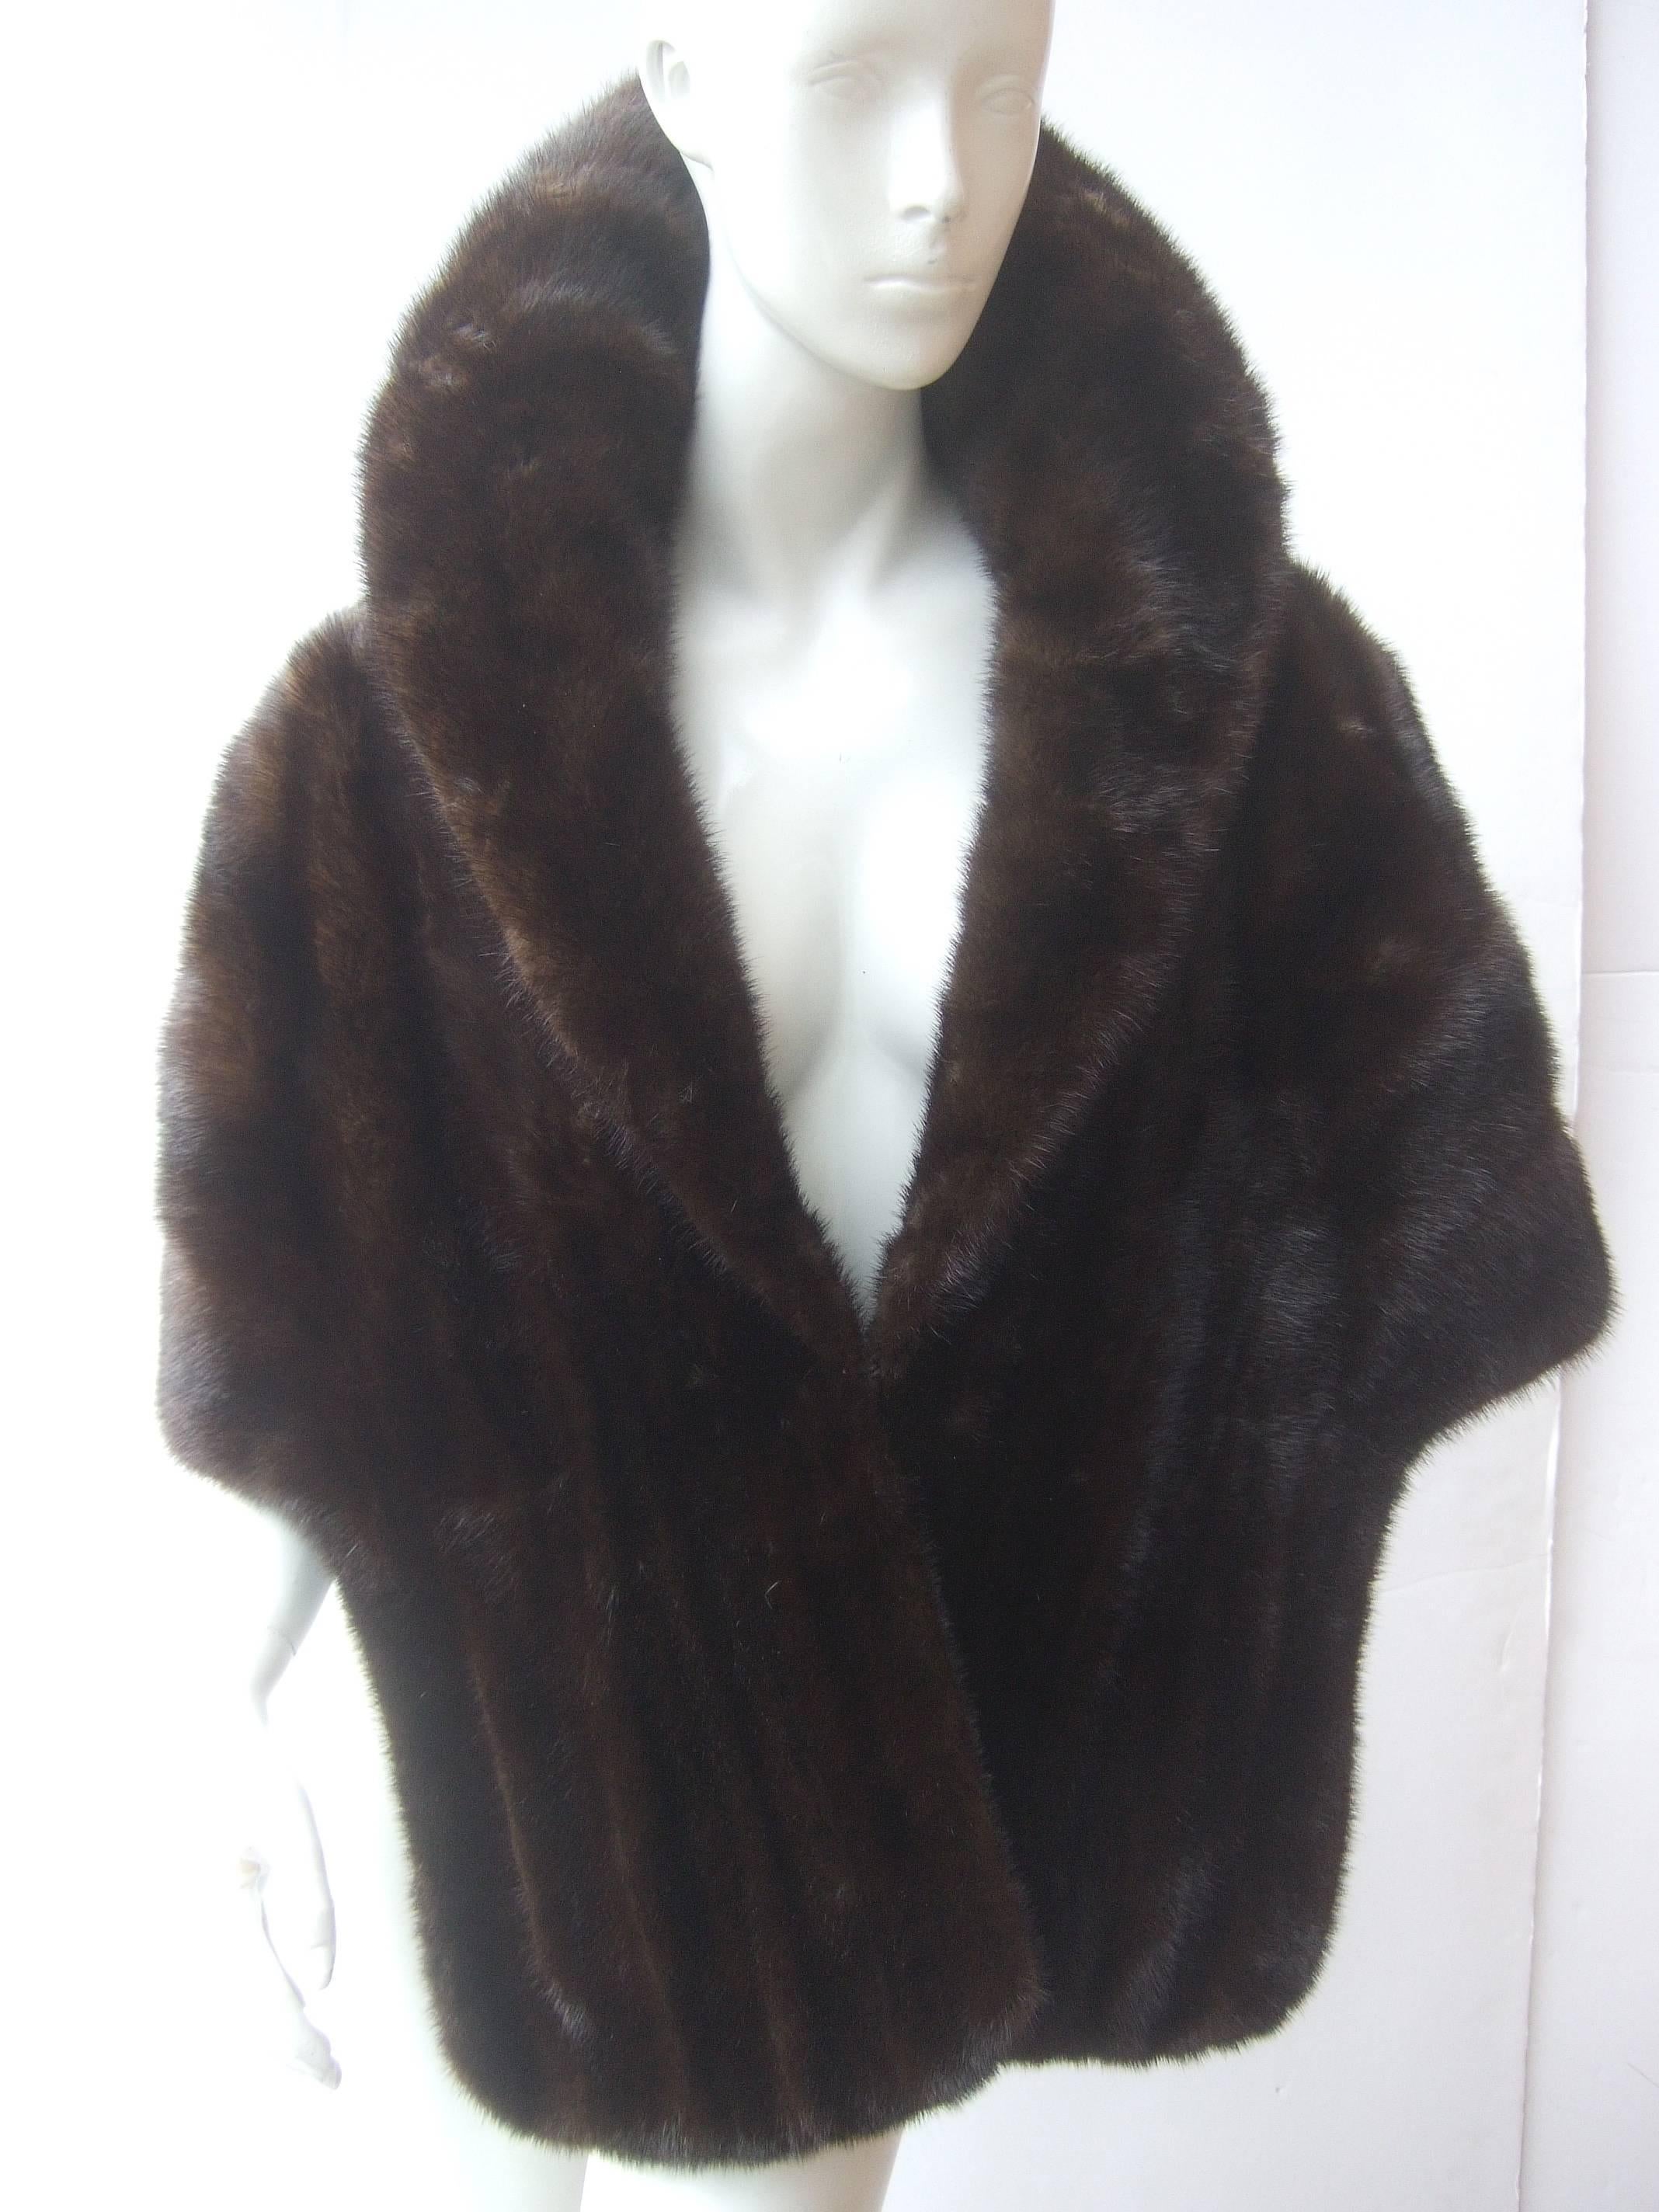 Luxurious plush mahogany brown mink stole
The elegant vintage mink stole is designed 
with lustrous dark brown mink fur pelts

The chic mink stole is embellished with
a dramatic mink fur collar that can folded 
up around the neckline. Designed